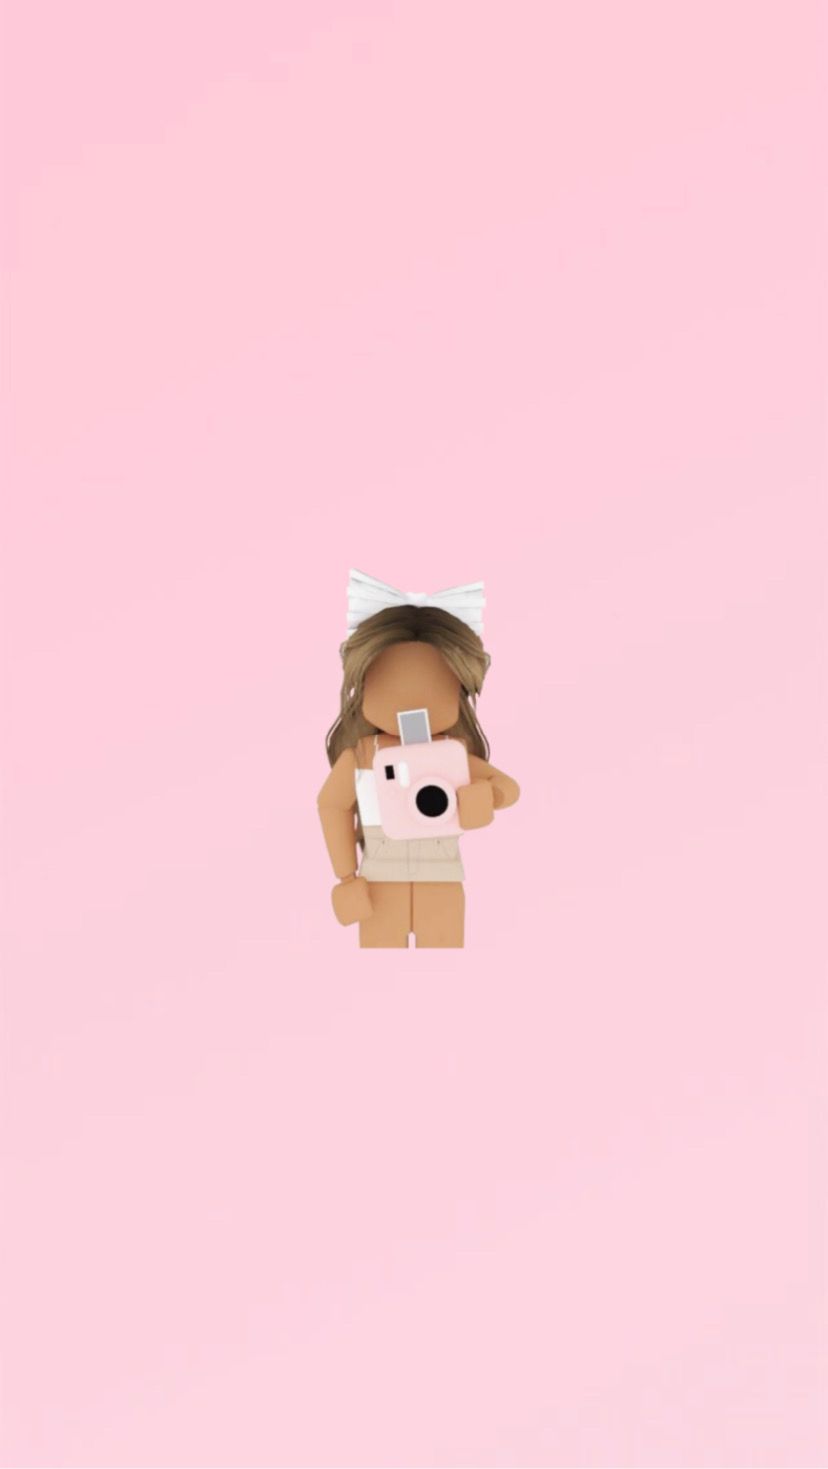 Roblox Render. Roblox picture, Roblox, iPhone wallpaper